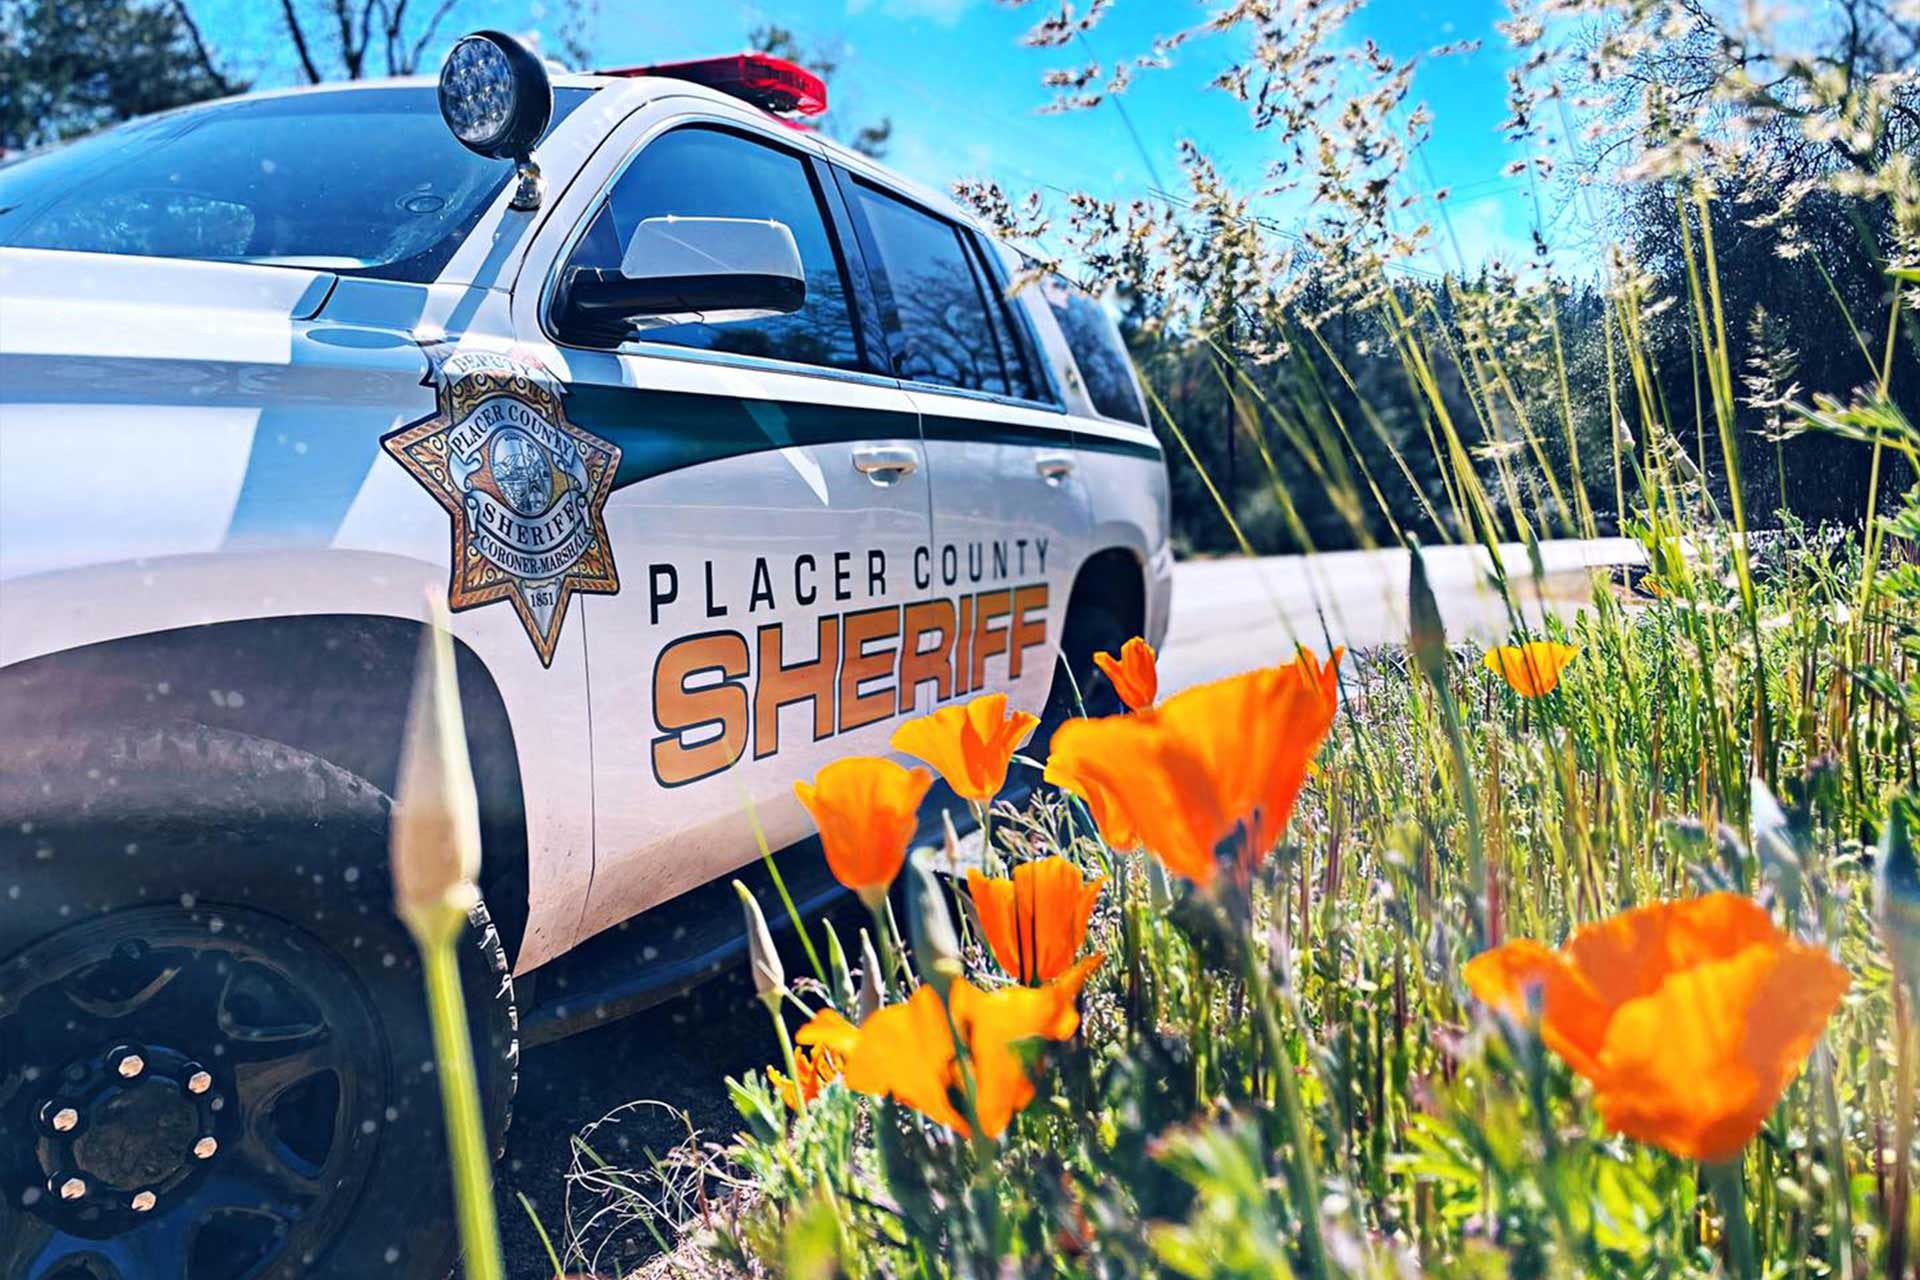 Placer County Sheriff Unit